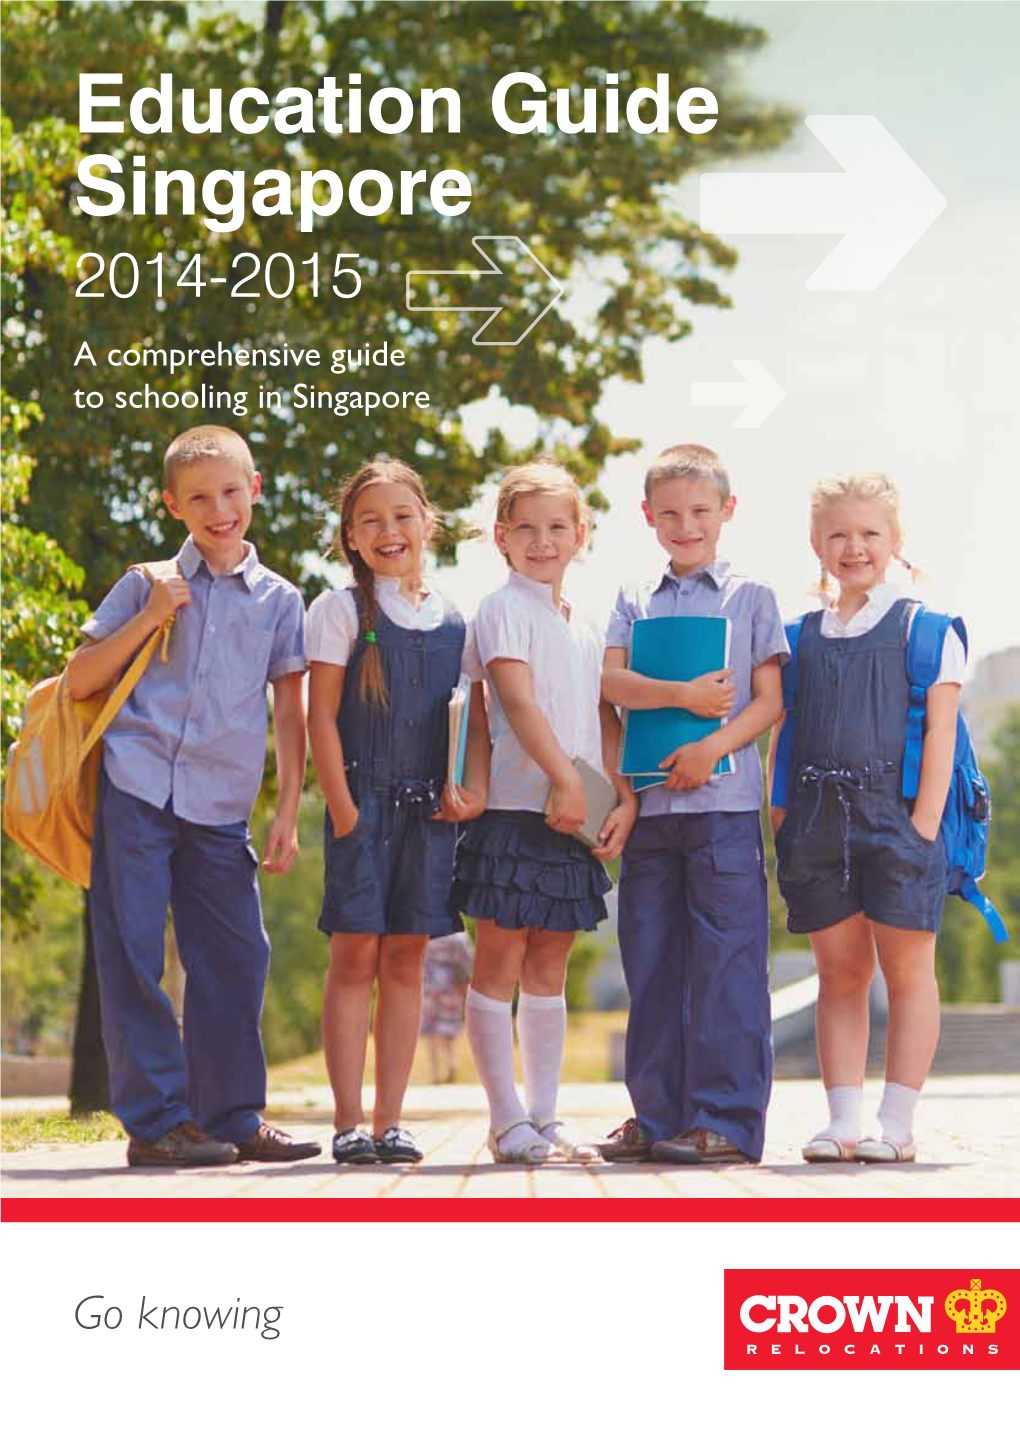 Education Guide Singapore 2014-2015 a Comprehensive Guide to Schooling in Singapore